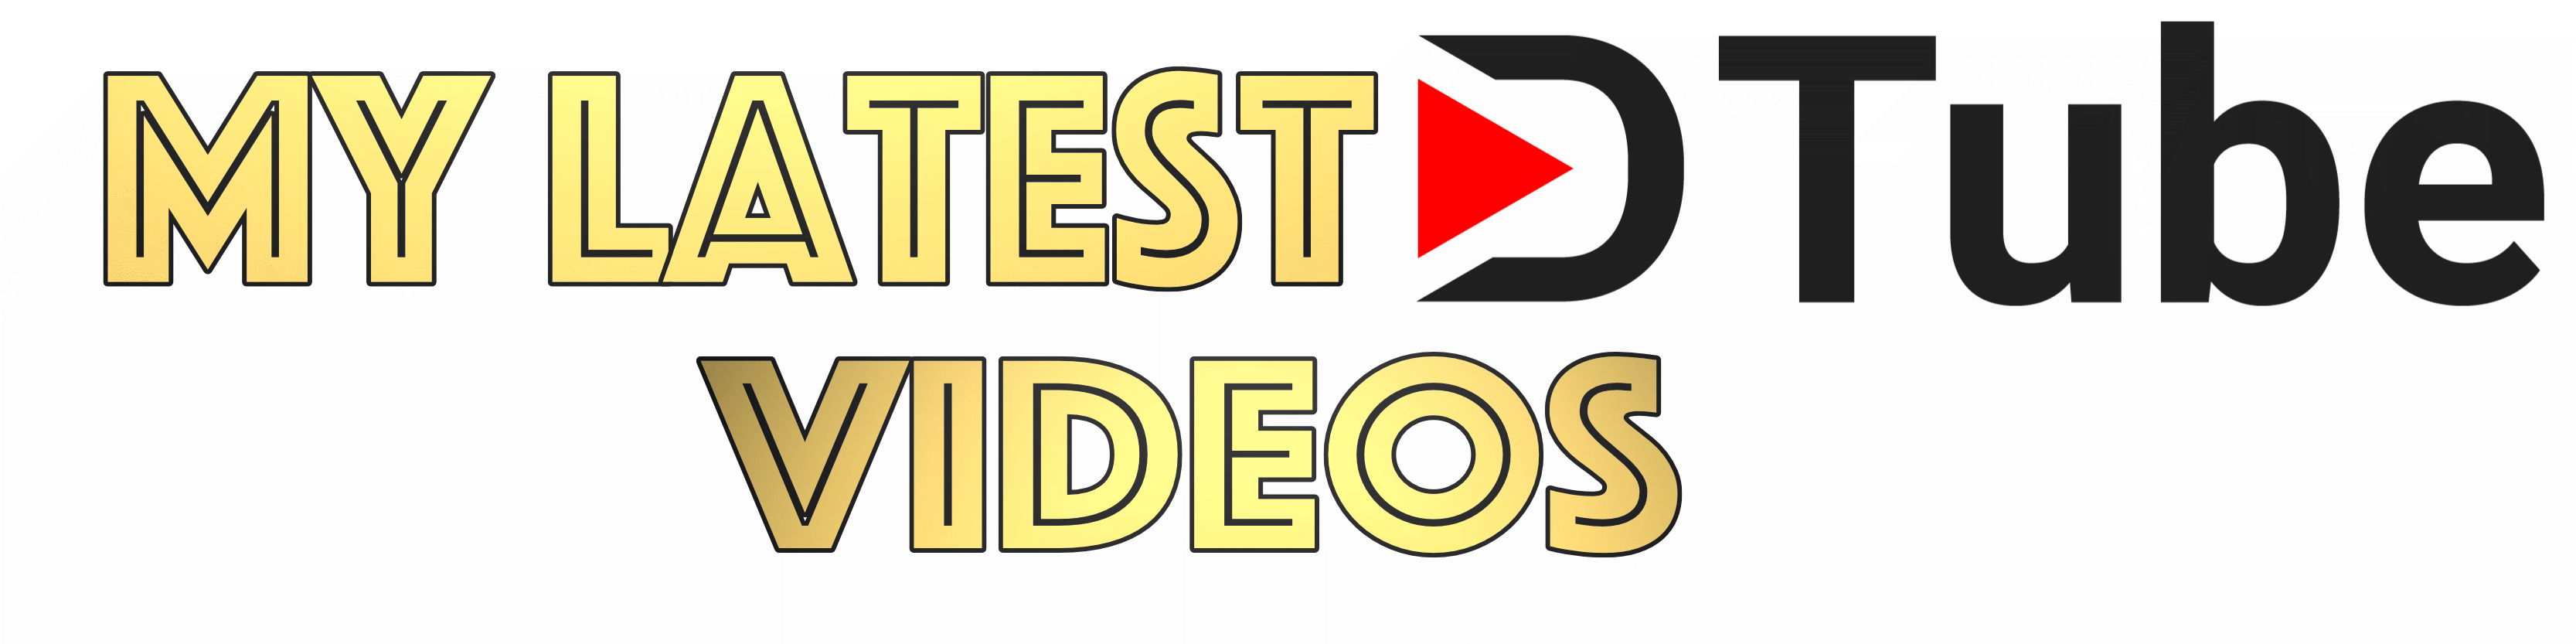 My Latest Dtube Videos.png